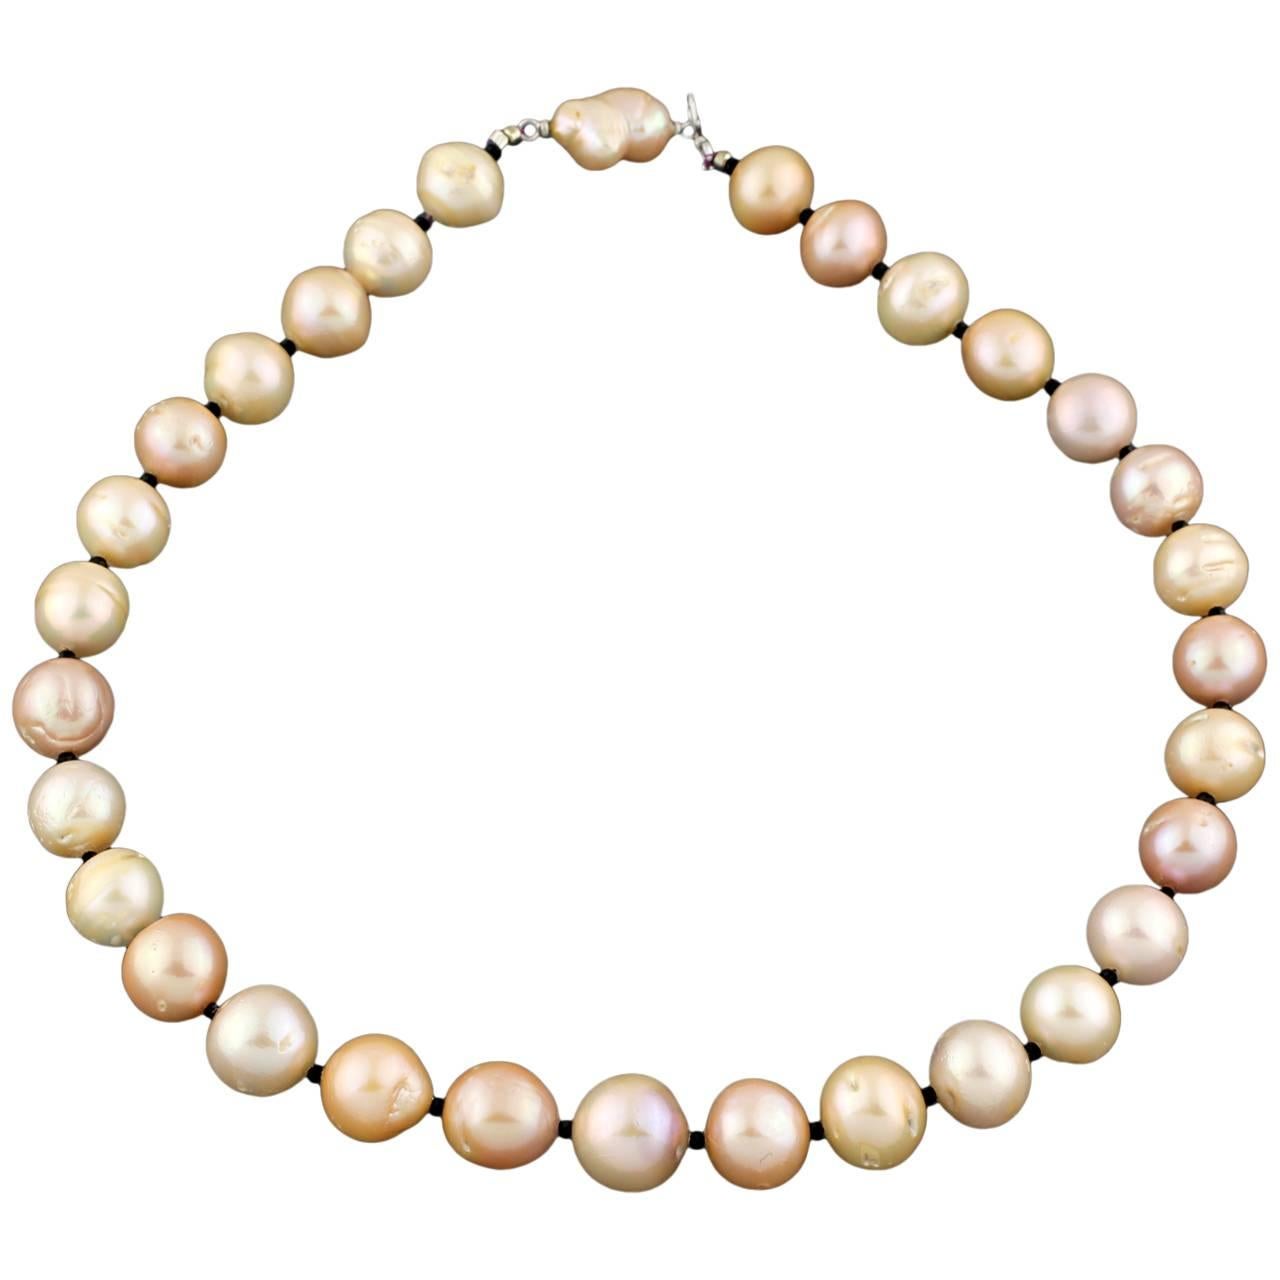 Tahitian Cultured Champagne Tone Pearl Necklace